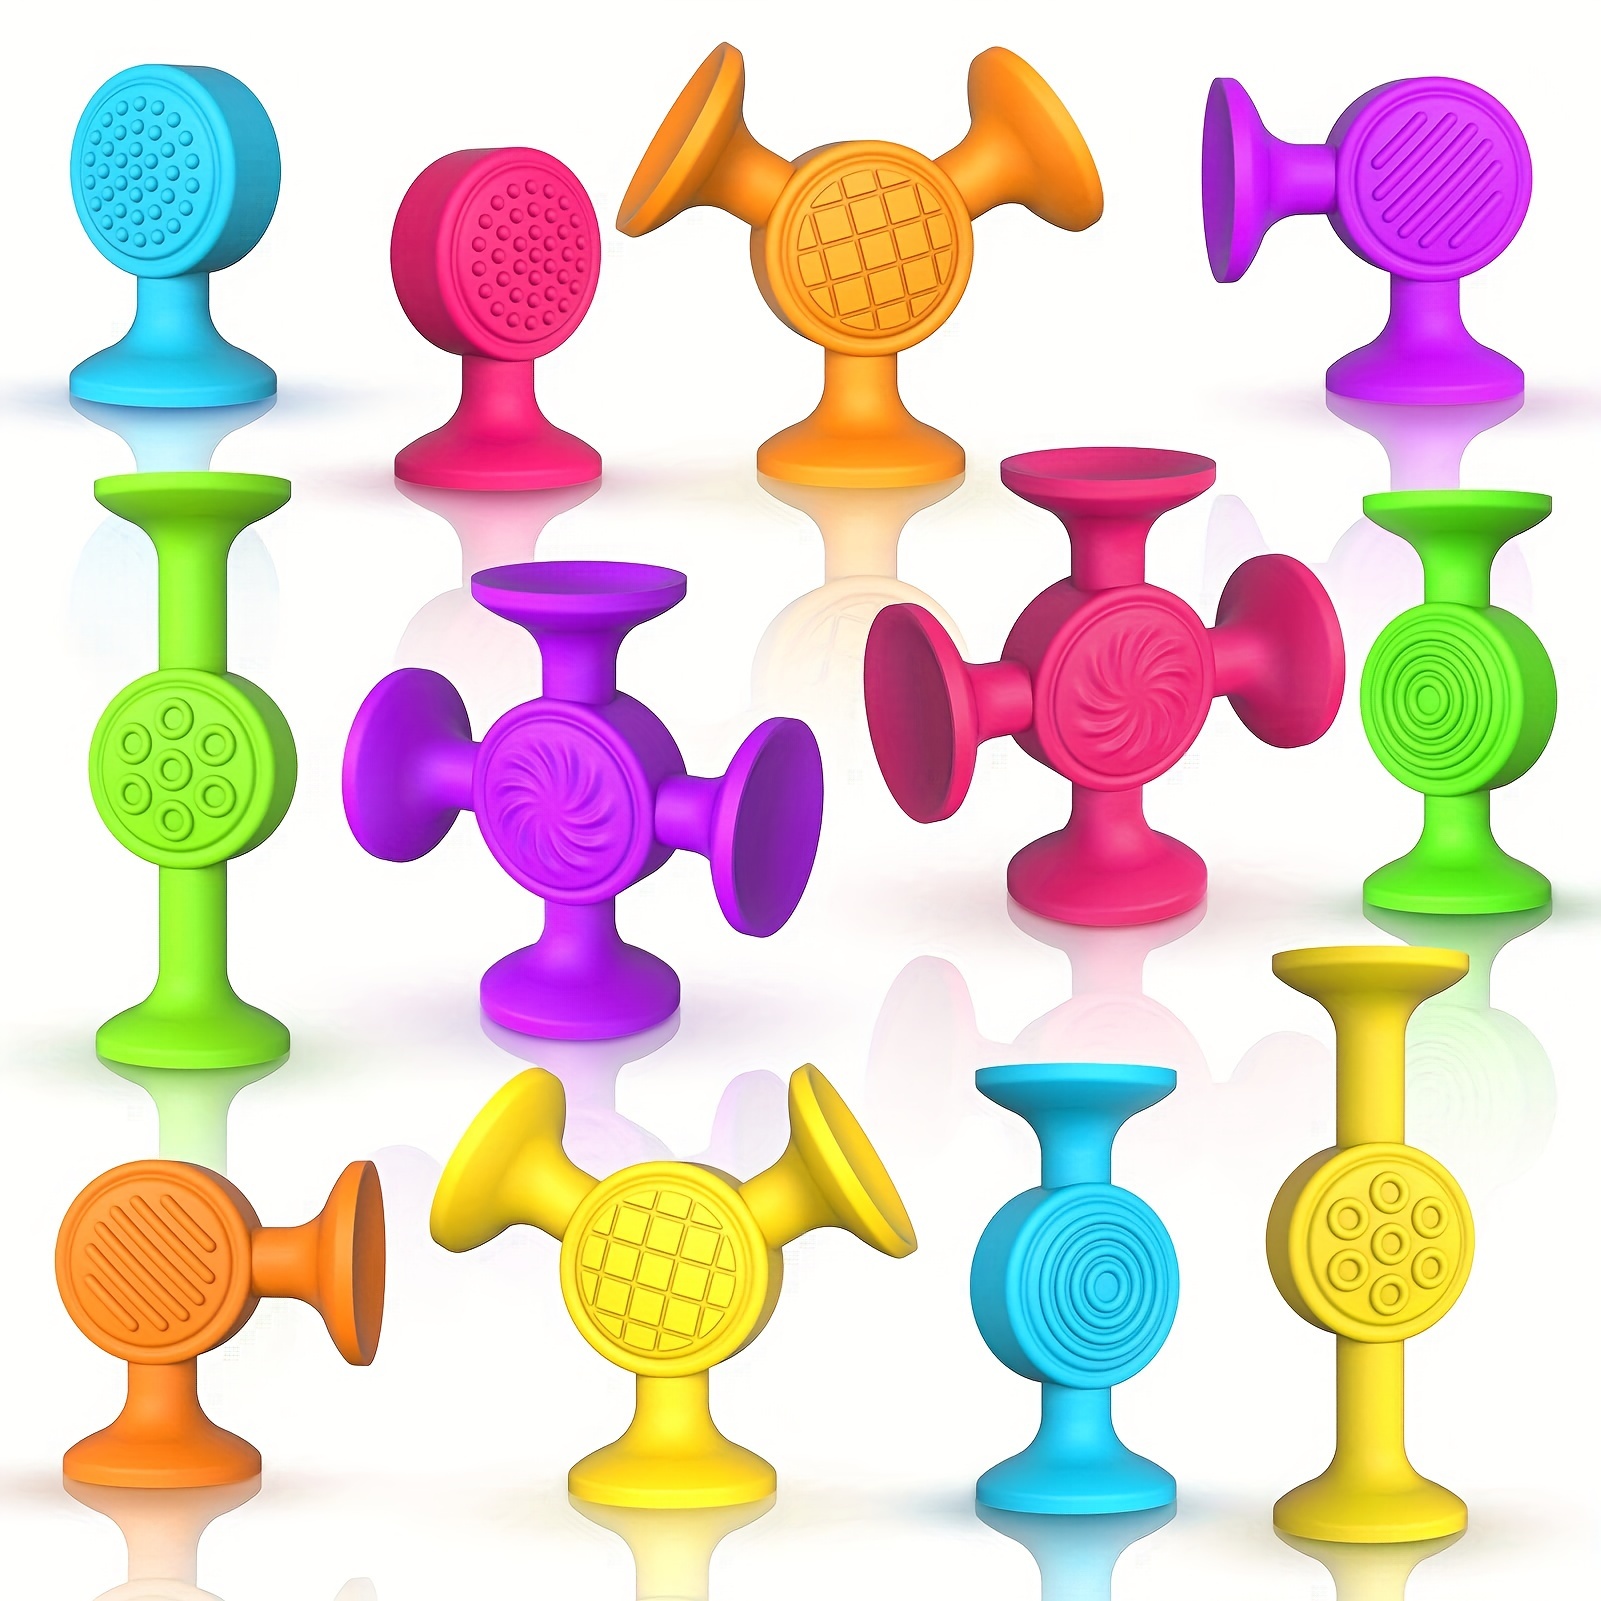  Suction Cup Toys for Toddlers, Bathtub Toys for Kids